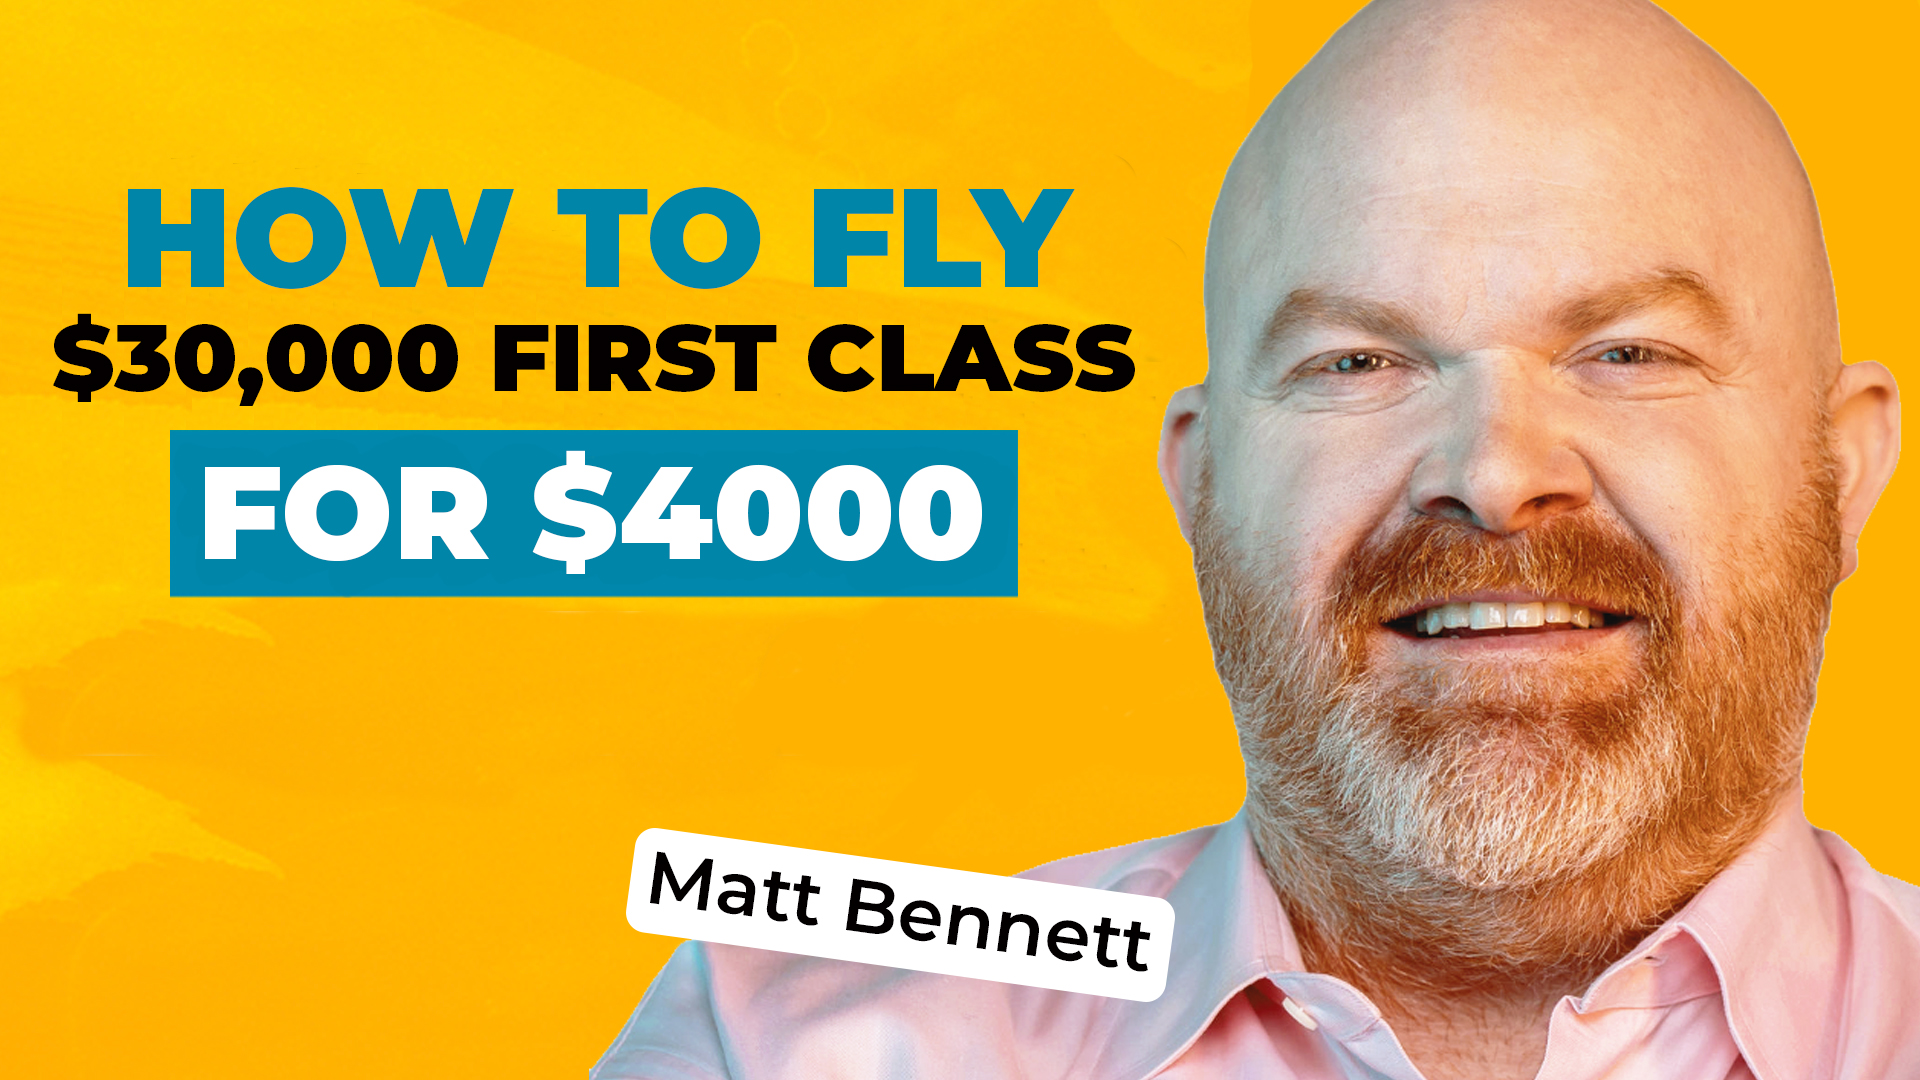 A photo of Matt Bennett on a bold yellow background, along with text reading "How to Fly $30,000 First Class for $4000"